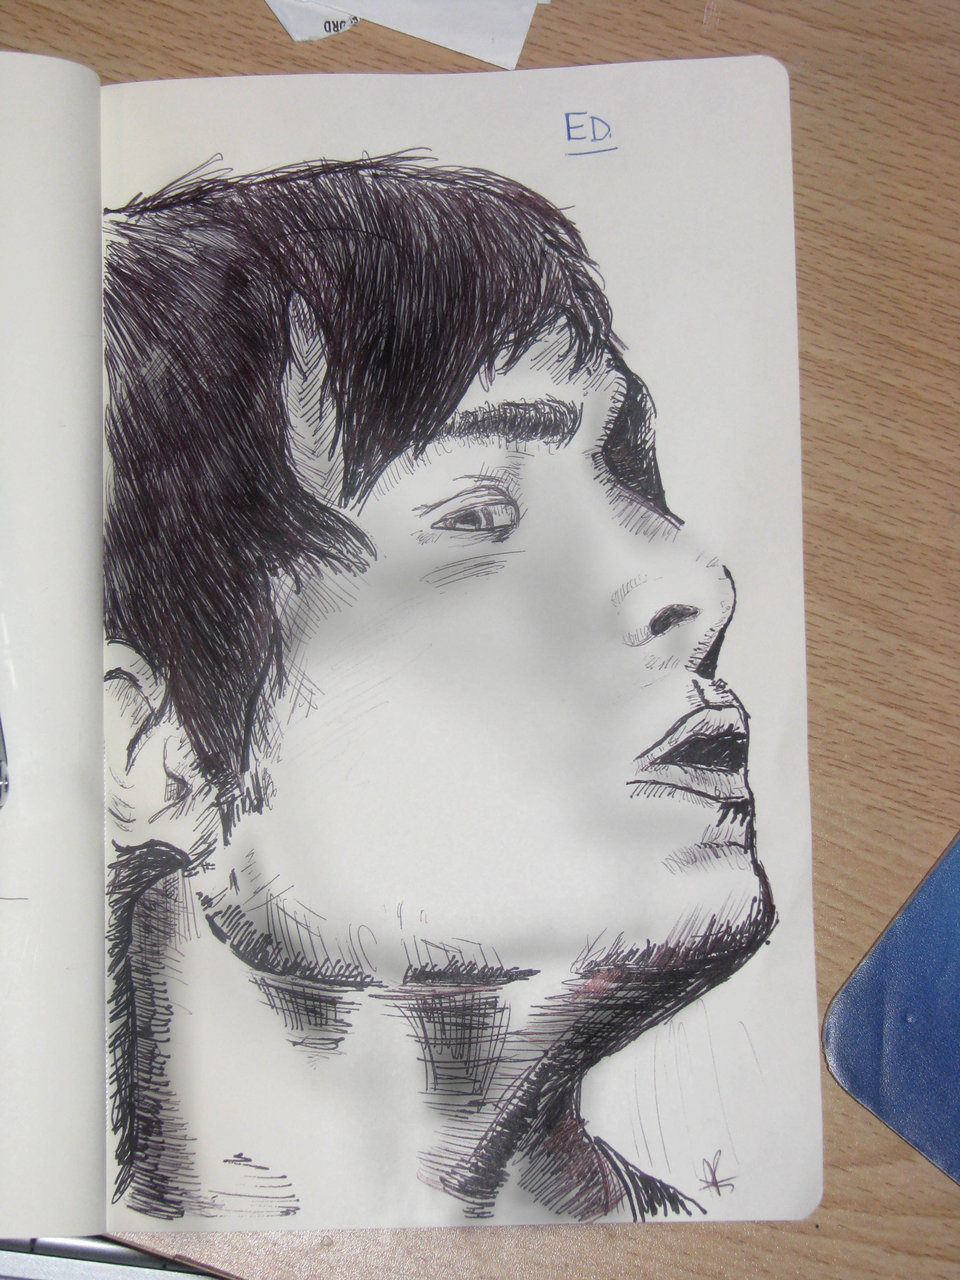 Ed Westwick. black pen. law notebook. productive? i think so.